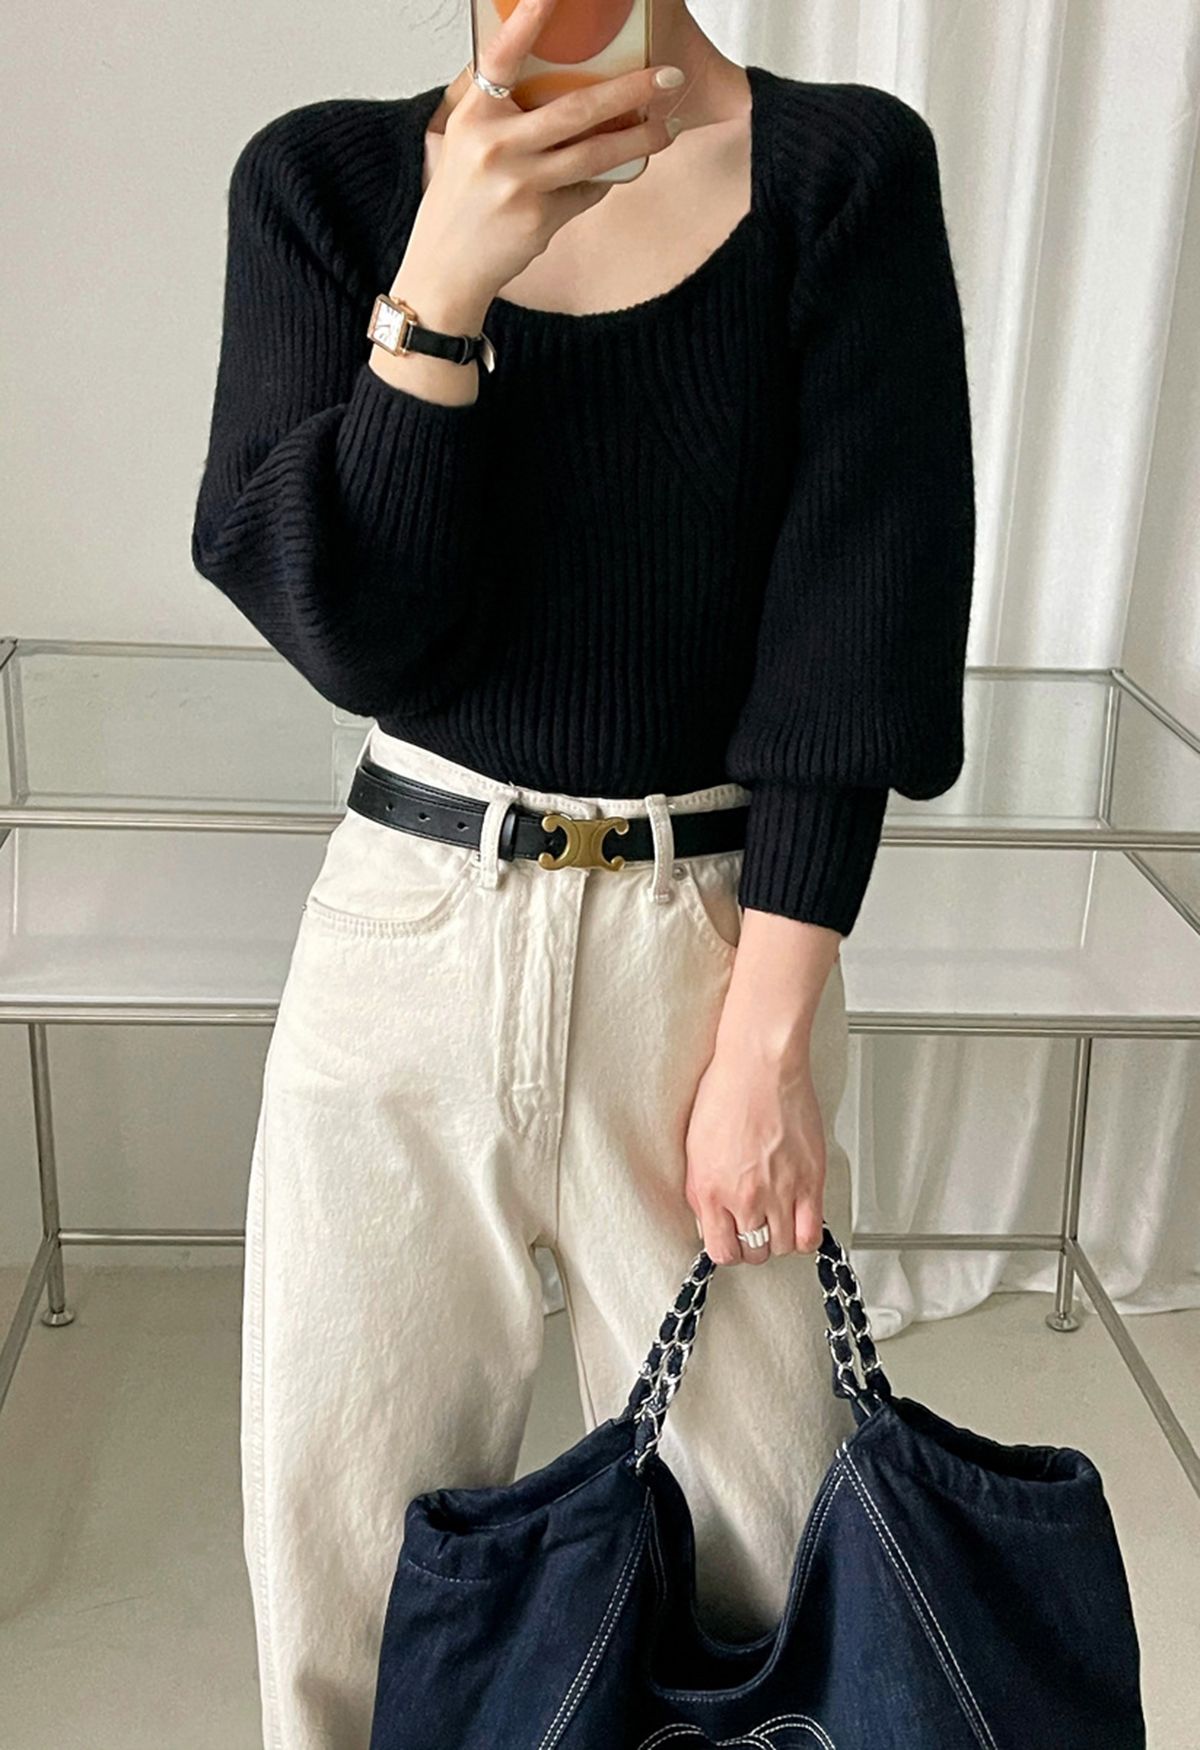 Wide Round Neck Rib Knit Top in Black